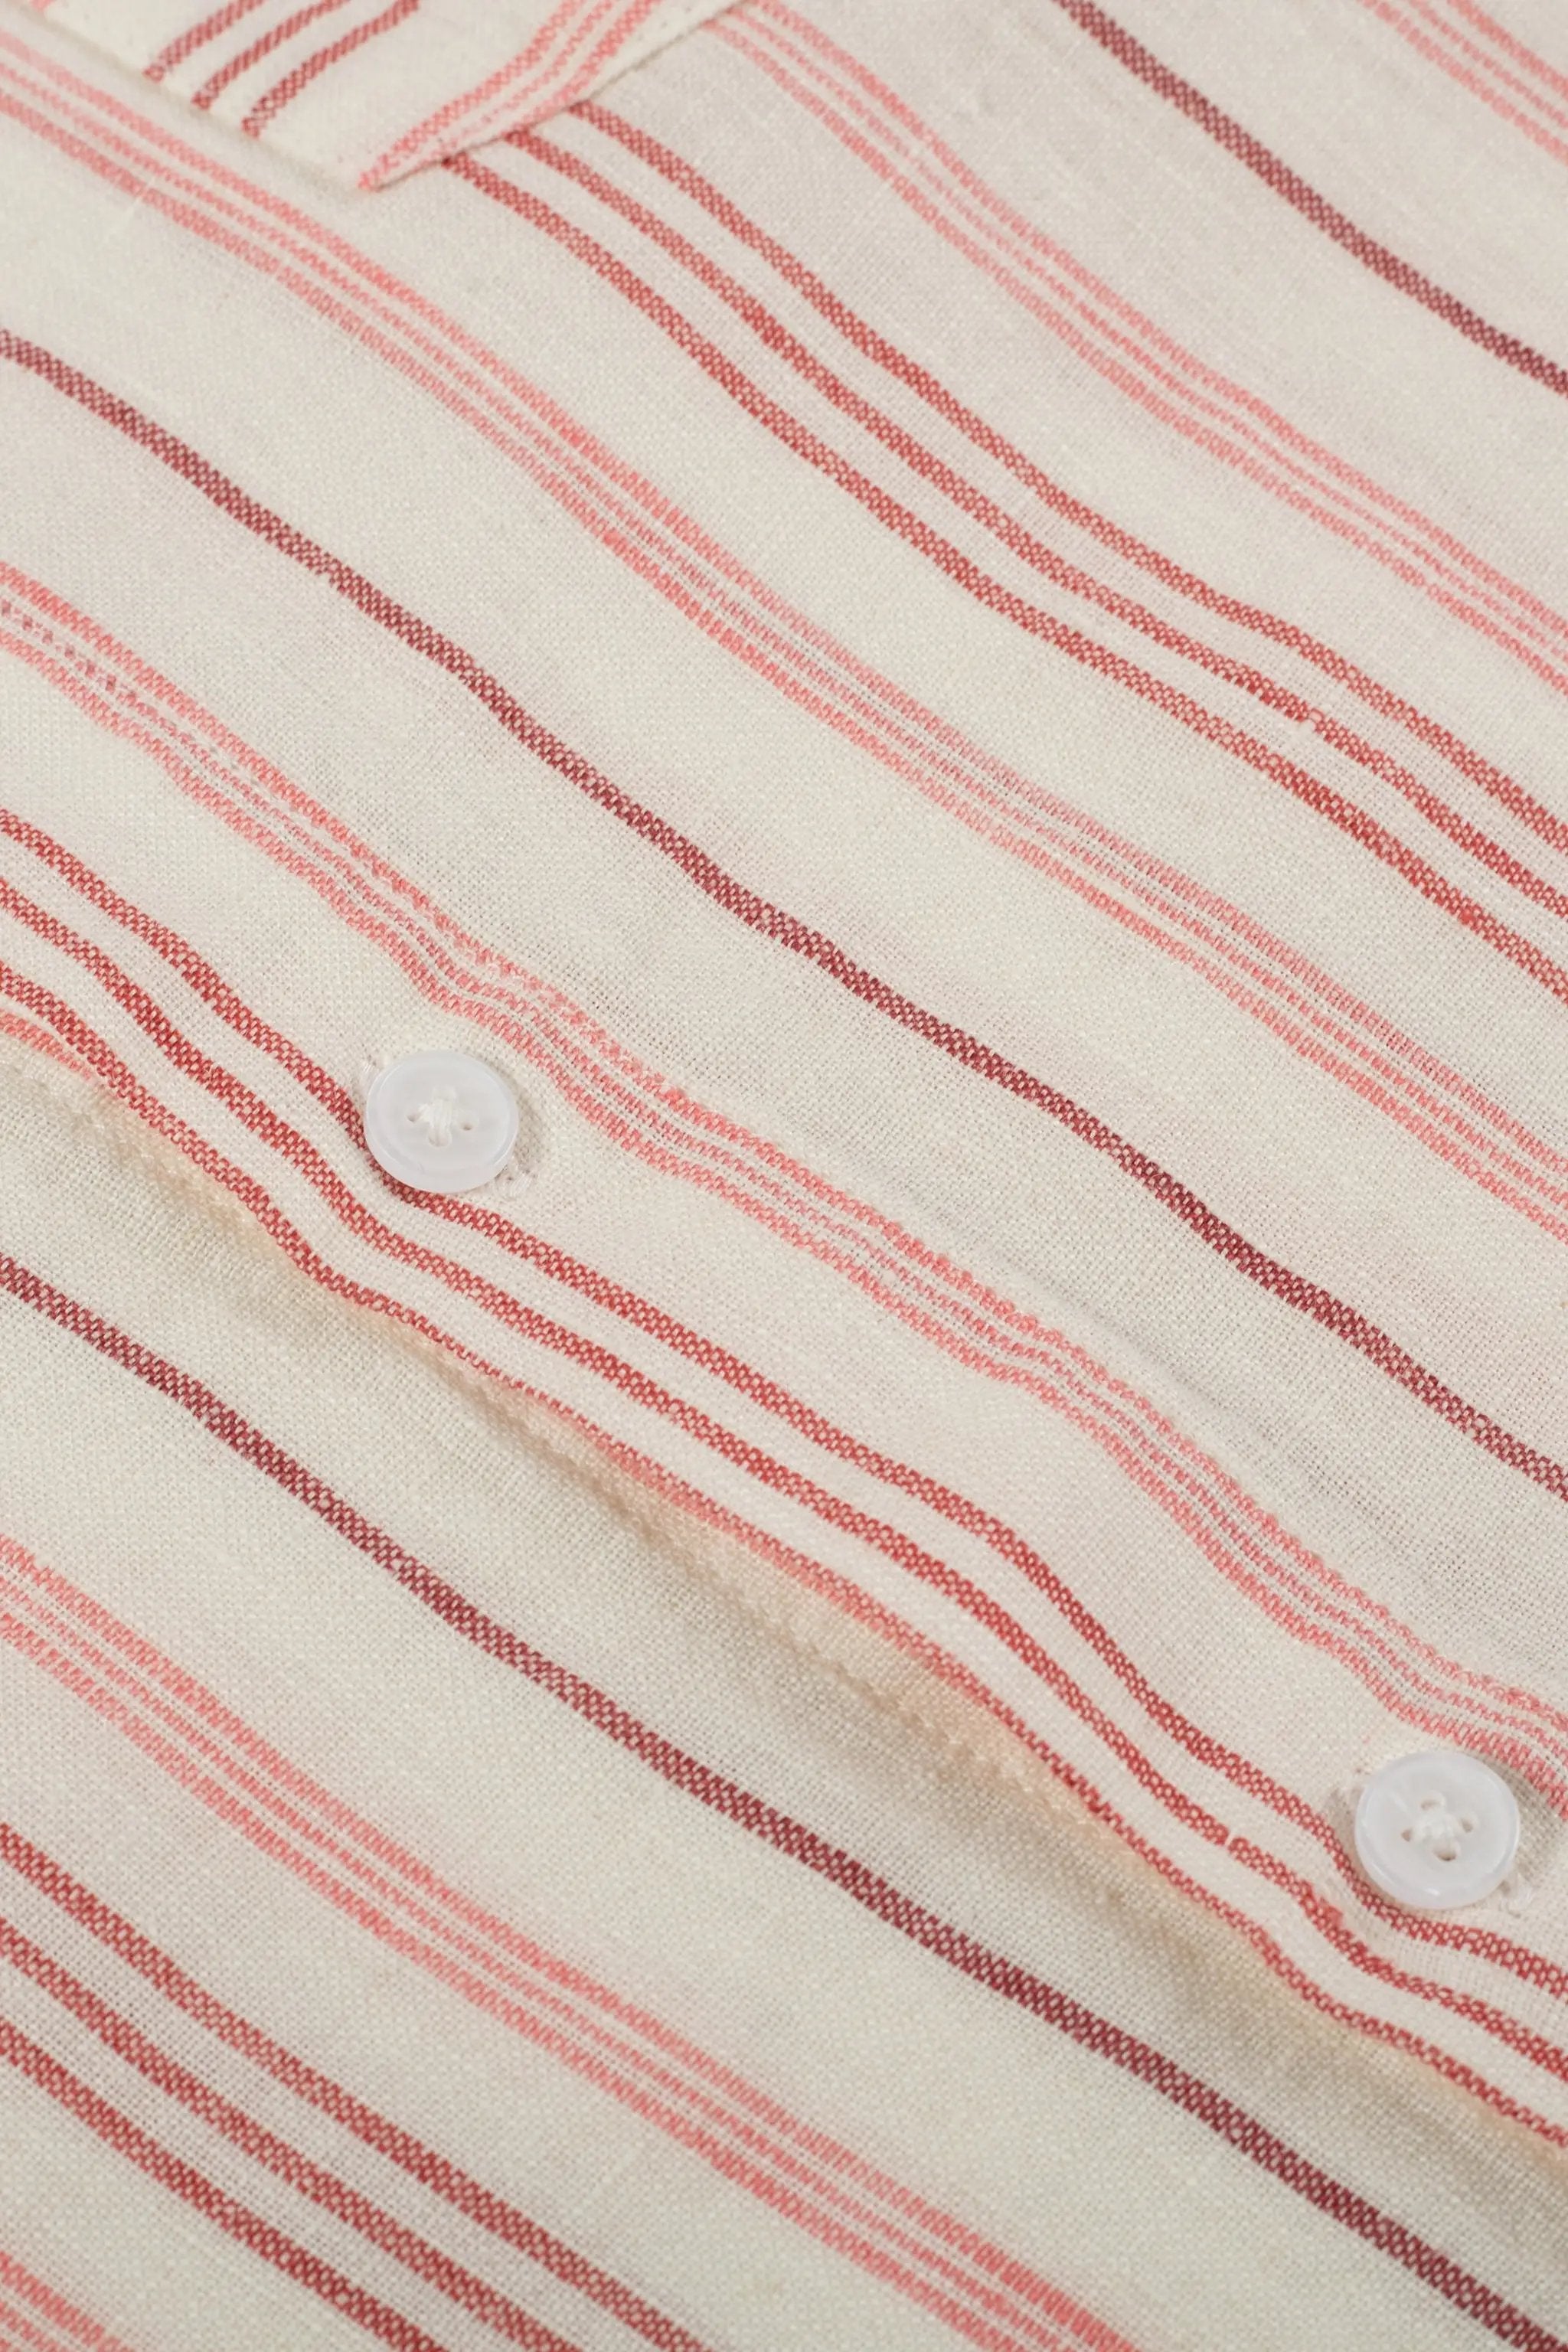 a close up of a red and white striped shirt